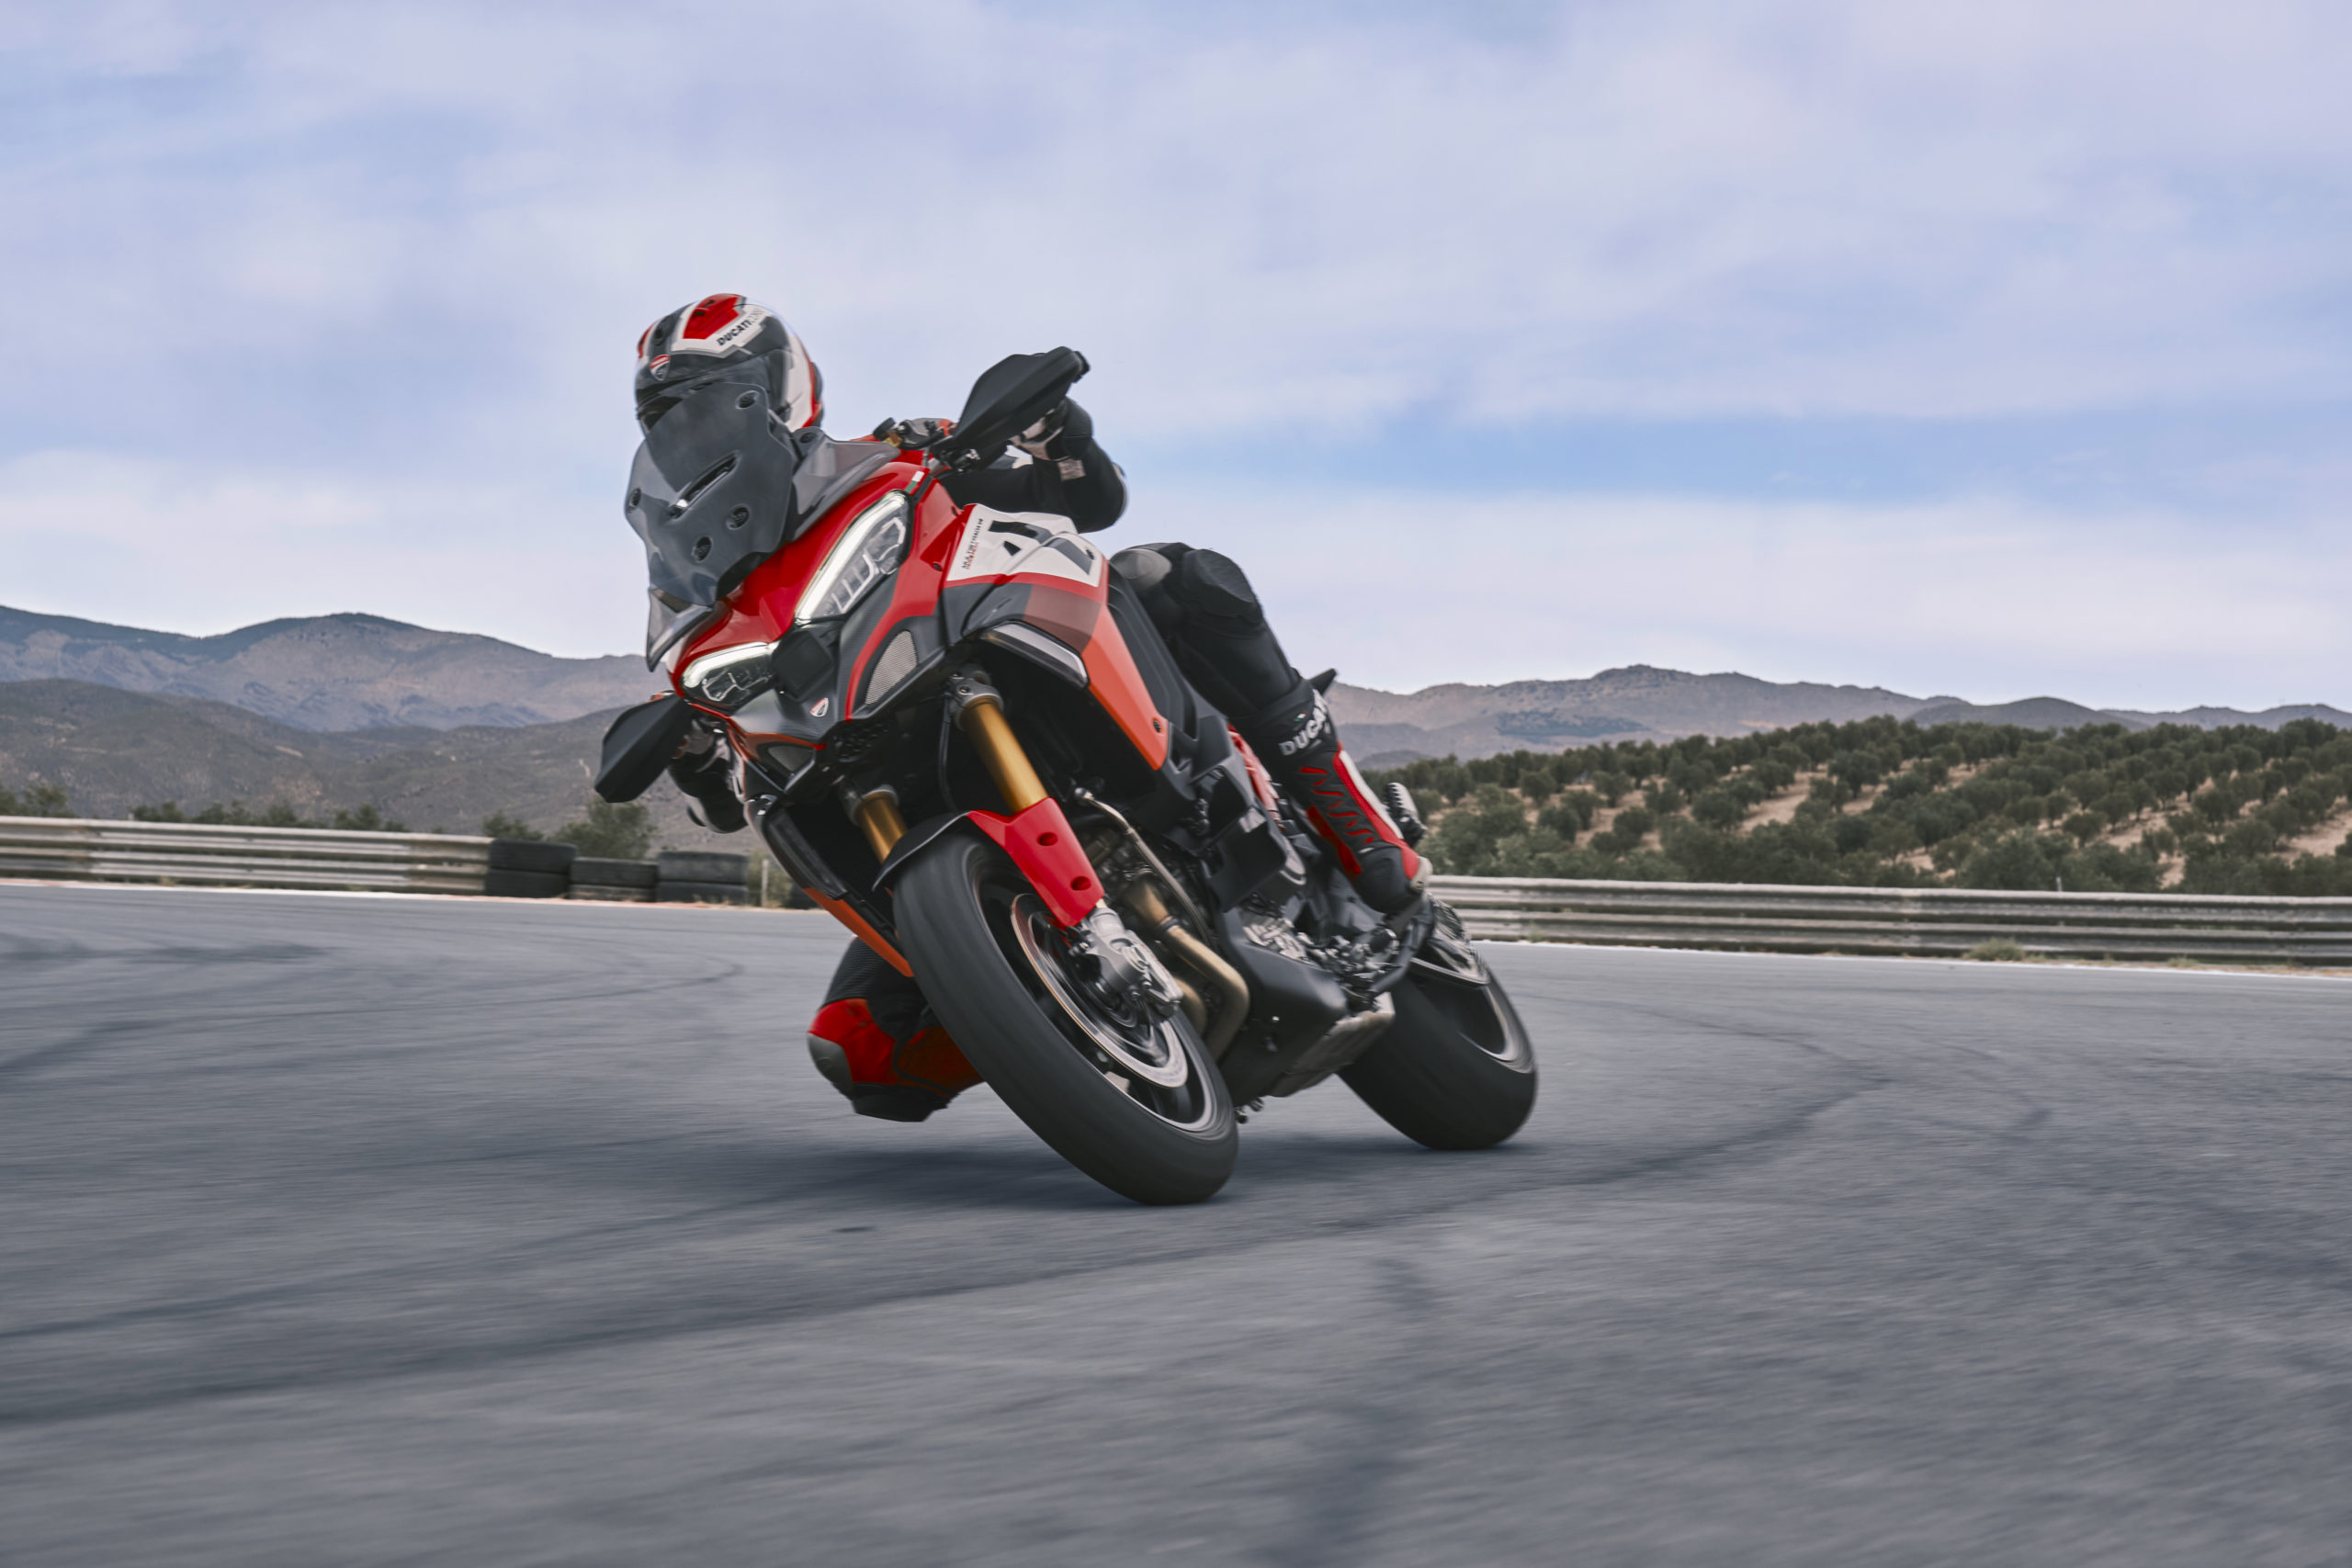 A side view of the new Multistrada V4 Pikes Peak from Ducati - the third motorcycle to be debuted in their World Premiere series. Media shows a rider sitting on the Pikes Pkea with clouds in the background